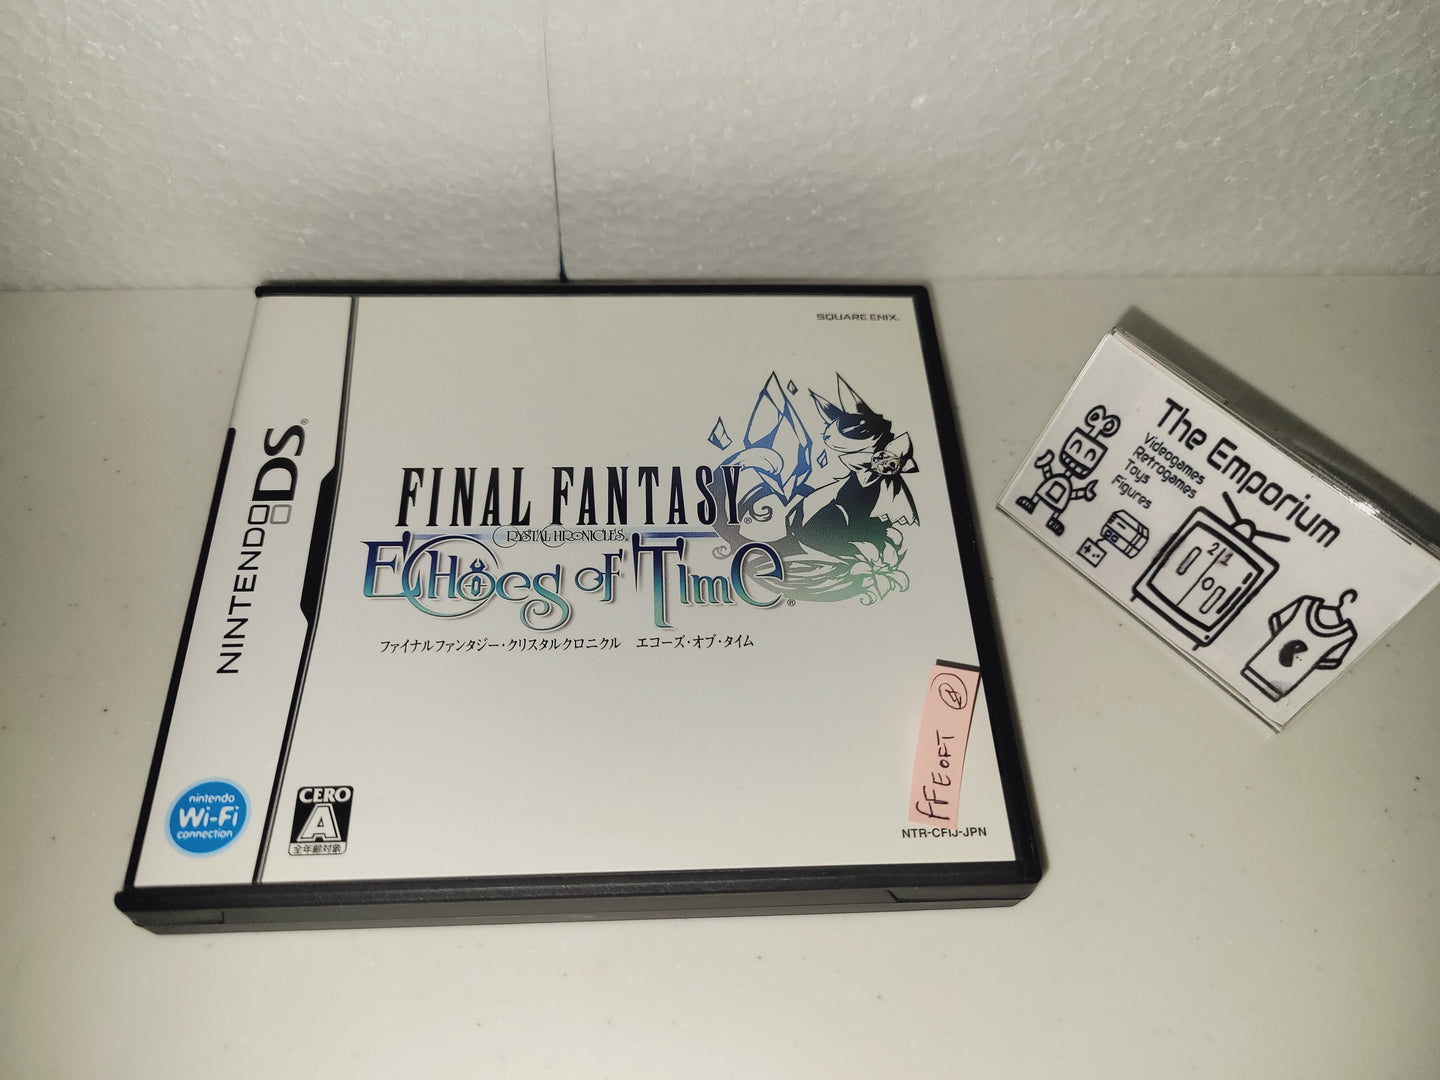 Final Fantasy Crystal Chronicles: Echoes of Time - Nintendo Ds NDS